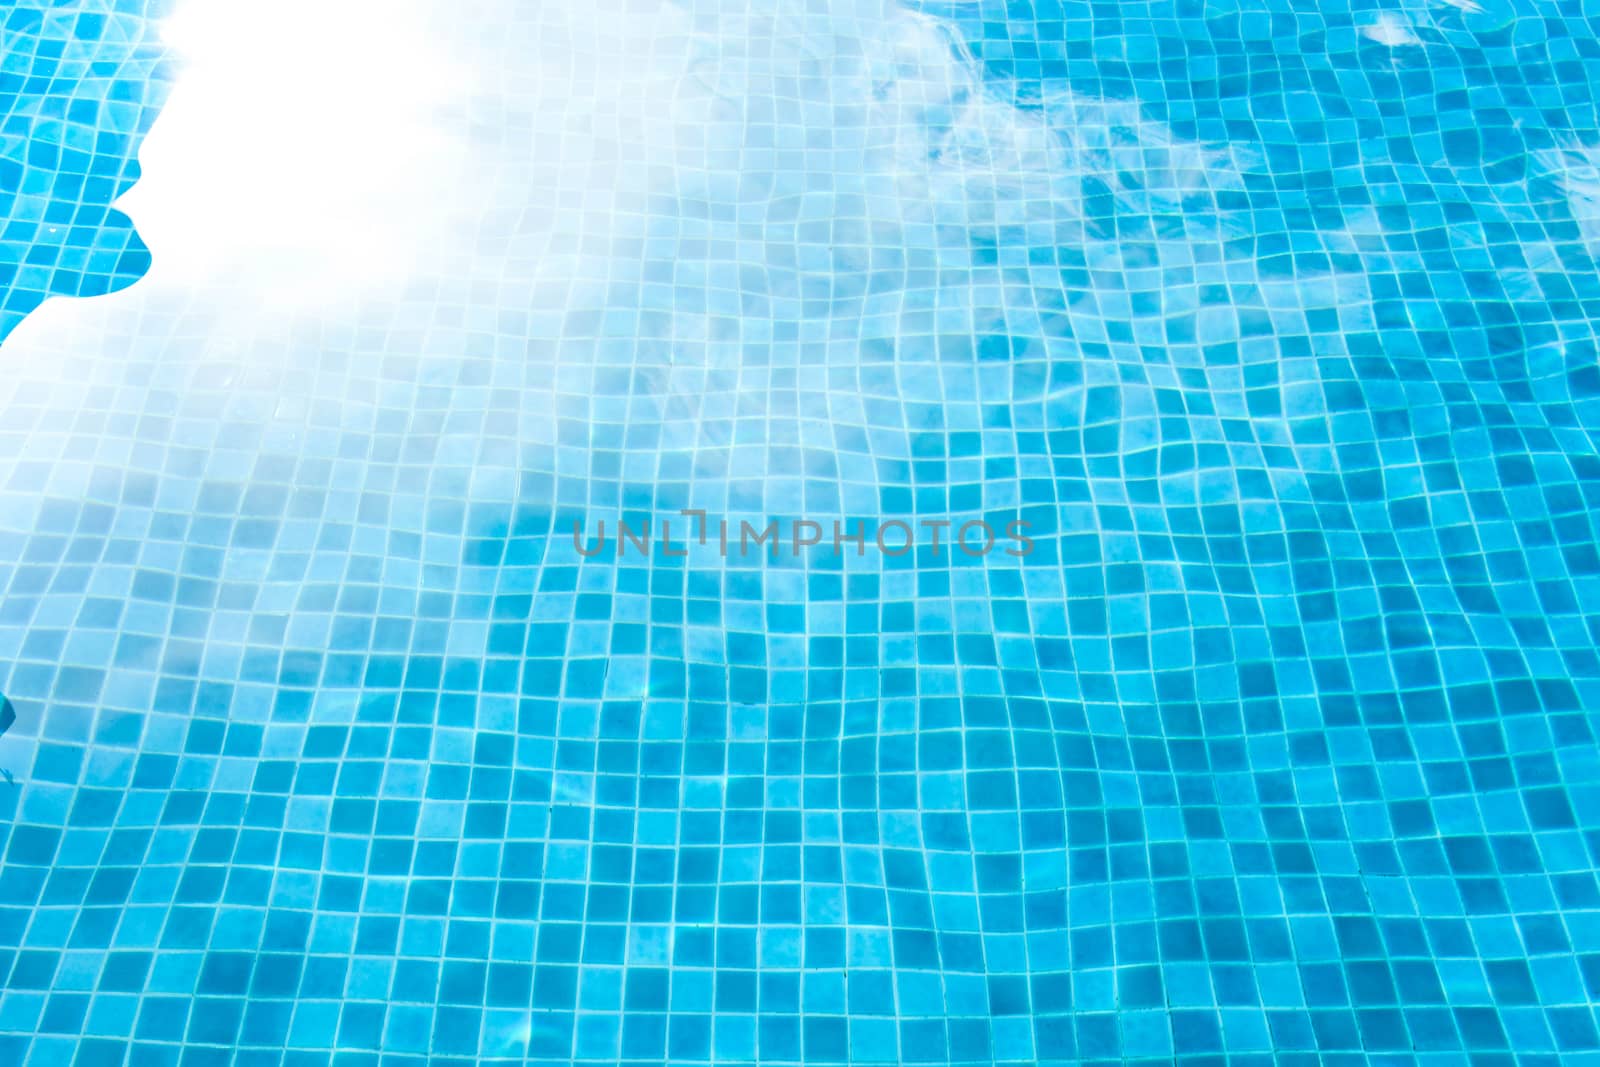 Blue tiled swimming pool background. View from eye.